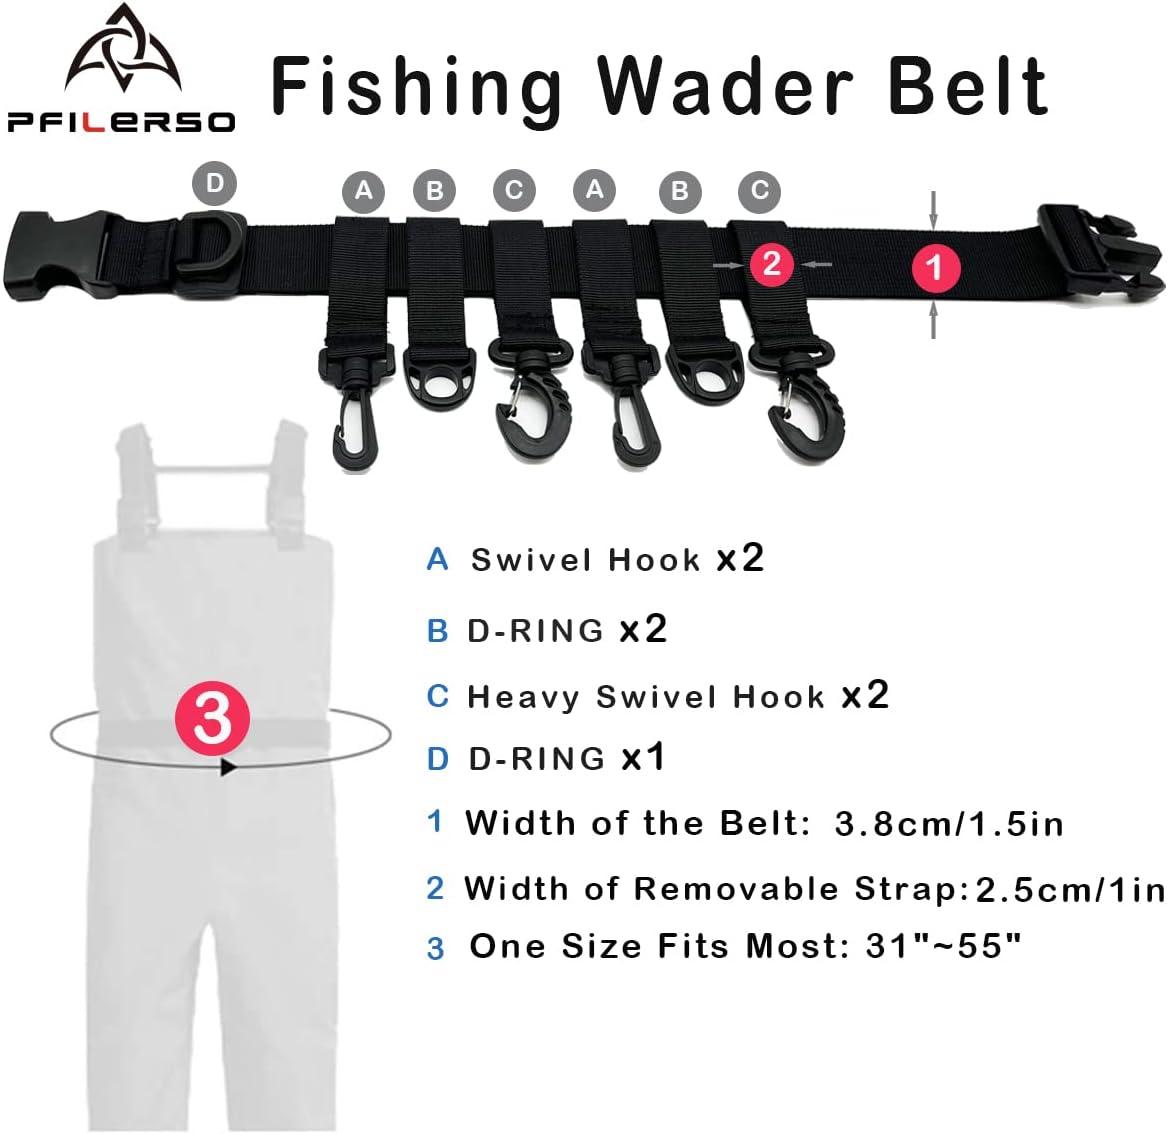 PFILERSO Adjustable Fishing Wader Belt with Lip Gripper and